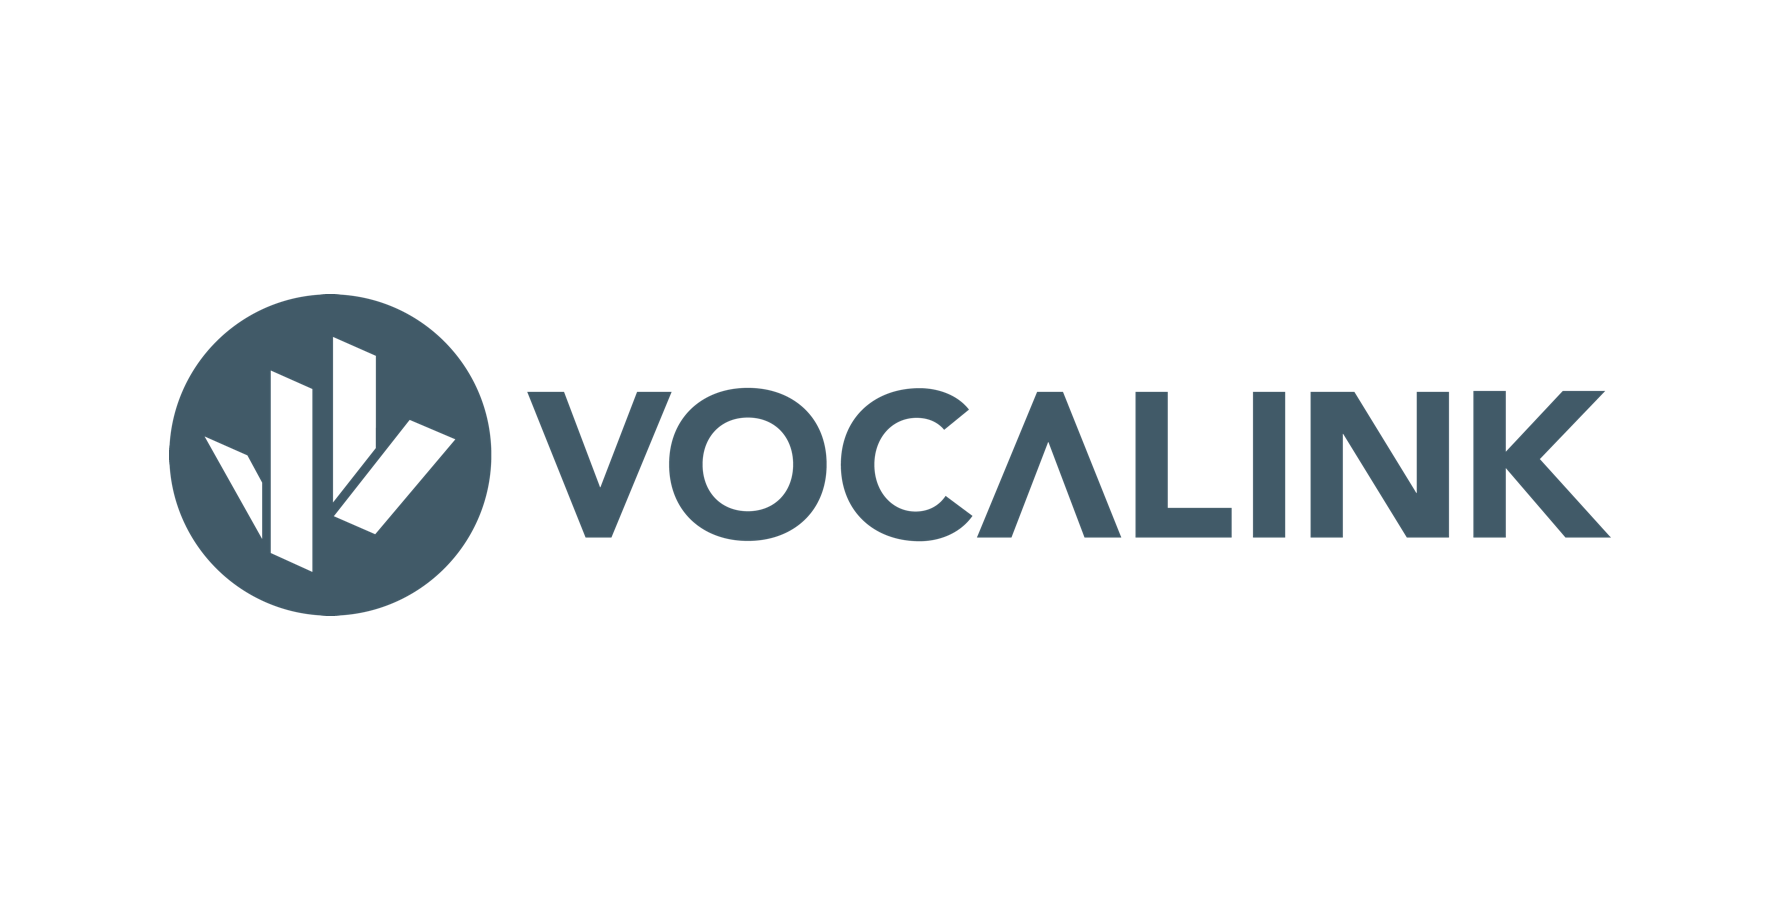 VocaLink Announced as Sponsor for FinTech North